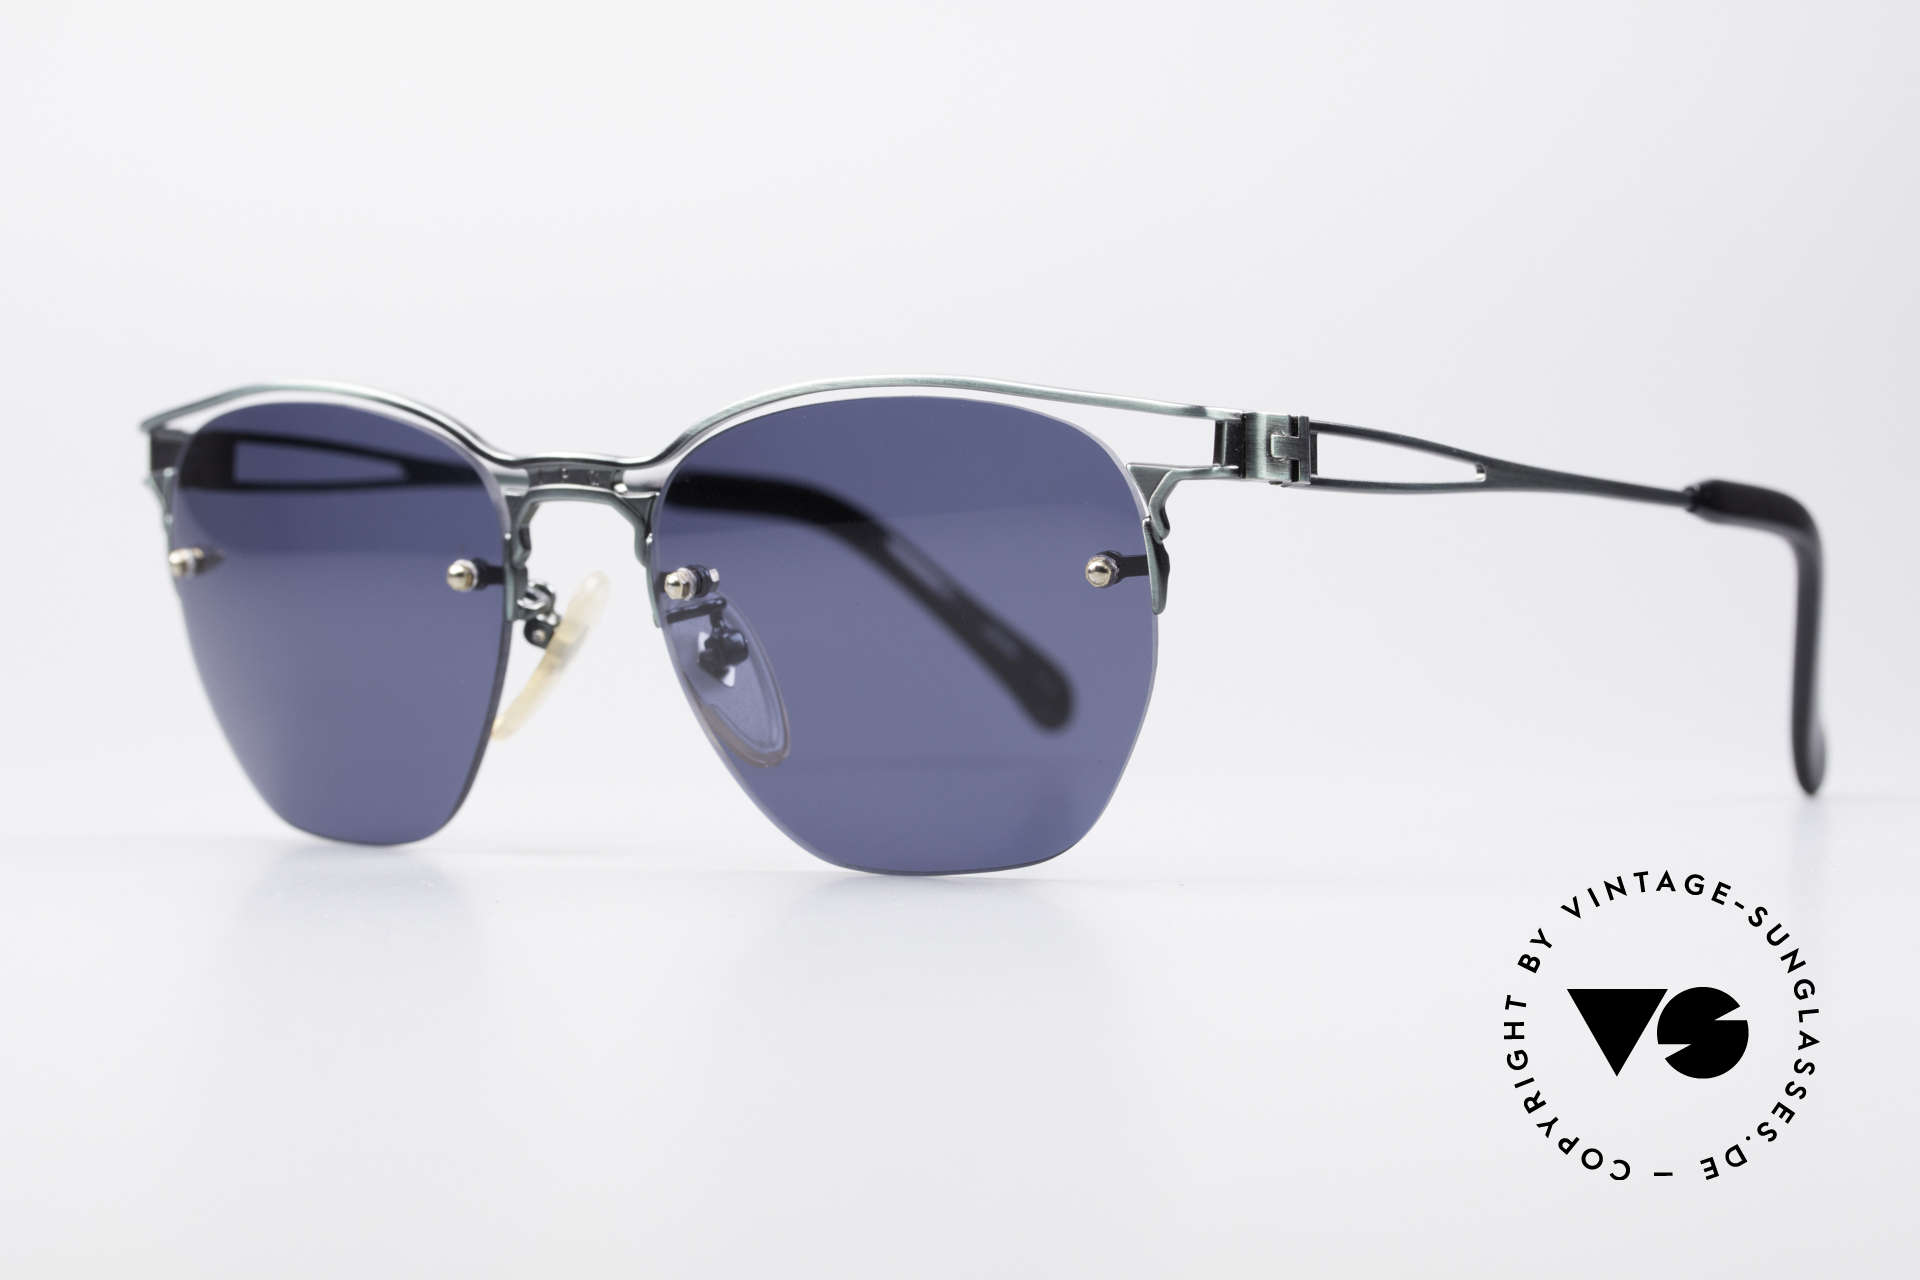 Jean Paul Gaultier 56-2173 True Vintage No Retro Shades, sun lenses (100% UV) are attached with small screws, Made for Men and Women